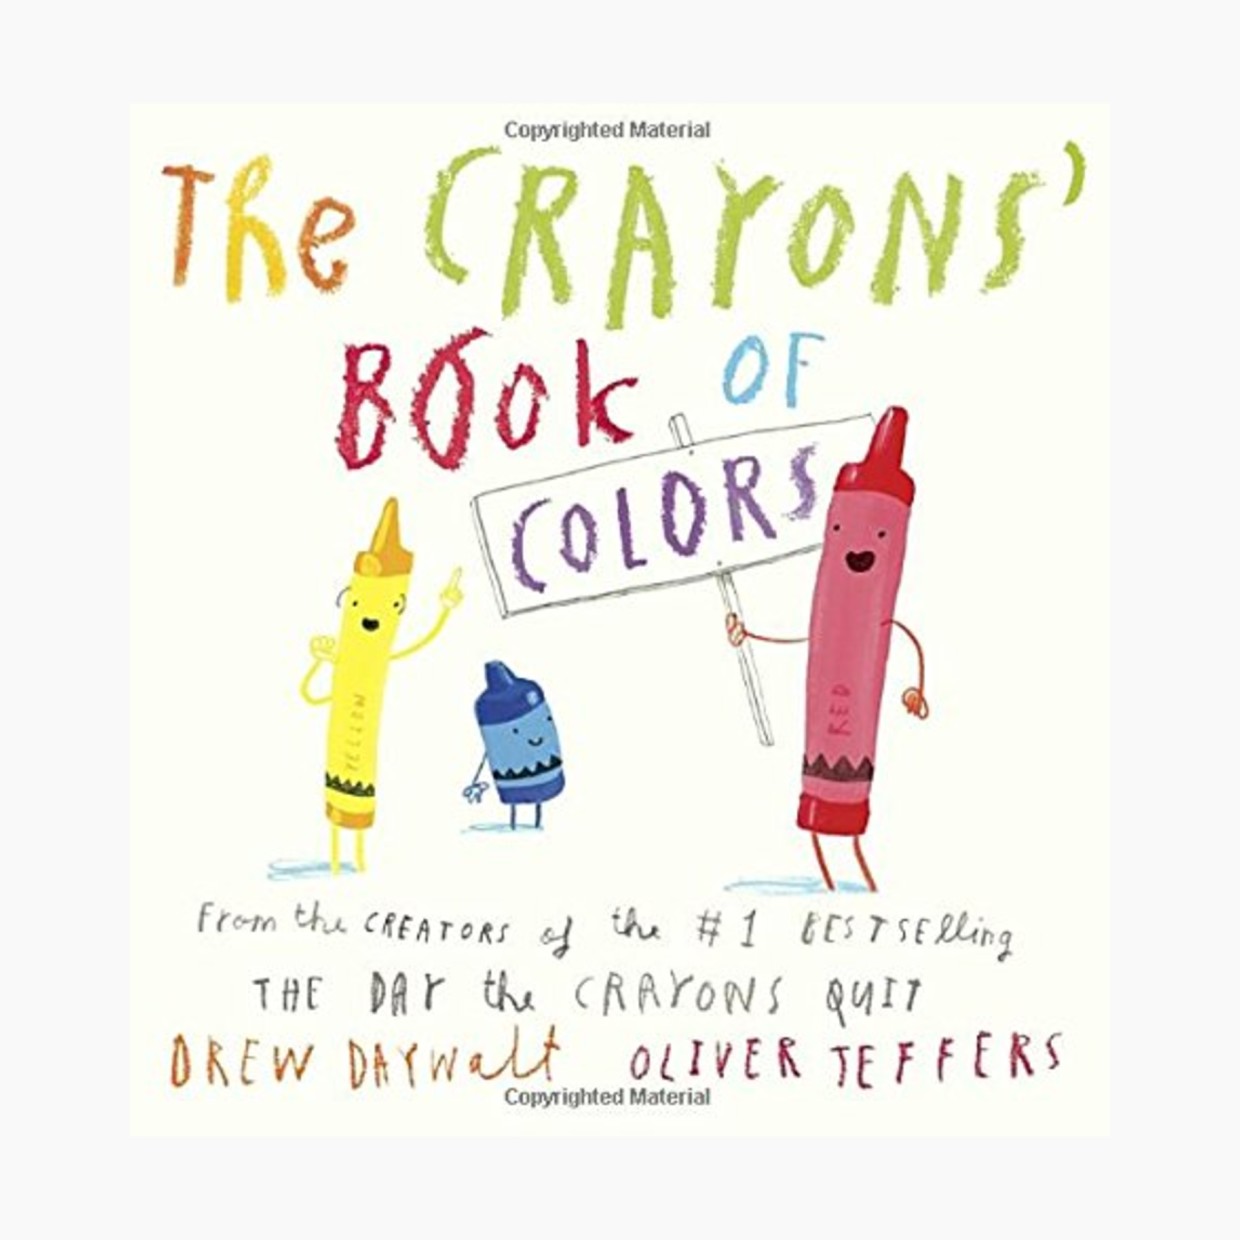 The Crayons' Book of Colors.